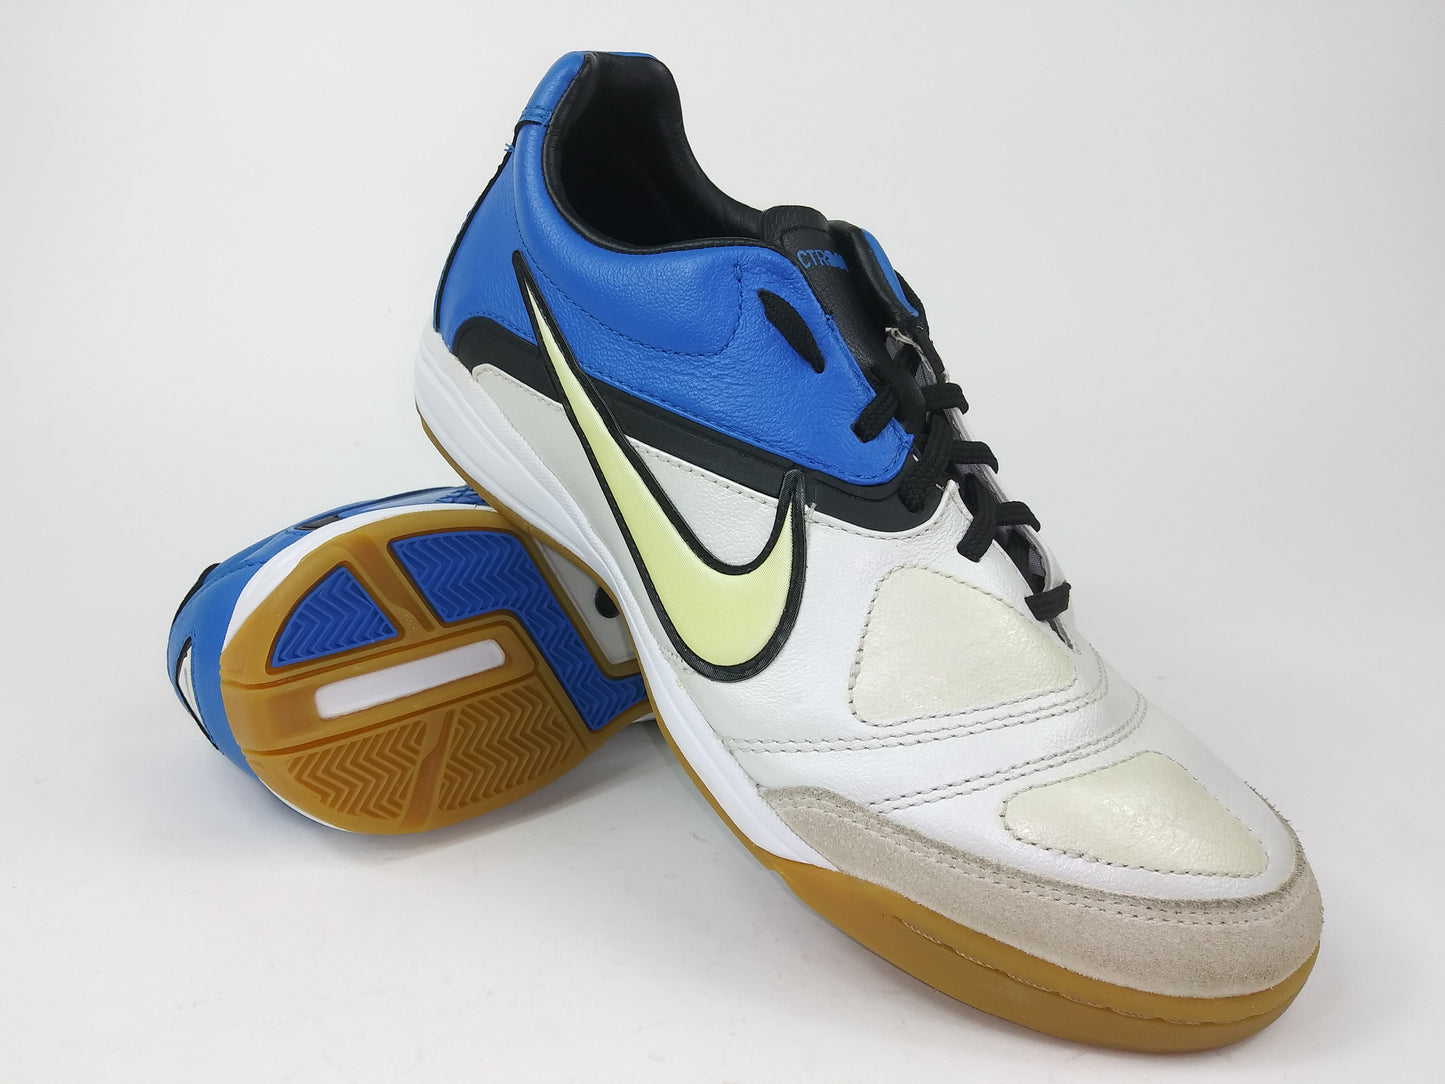 Nike CTR 360 Libretto ll IC Indoor Shoes White Blue